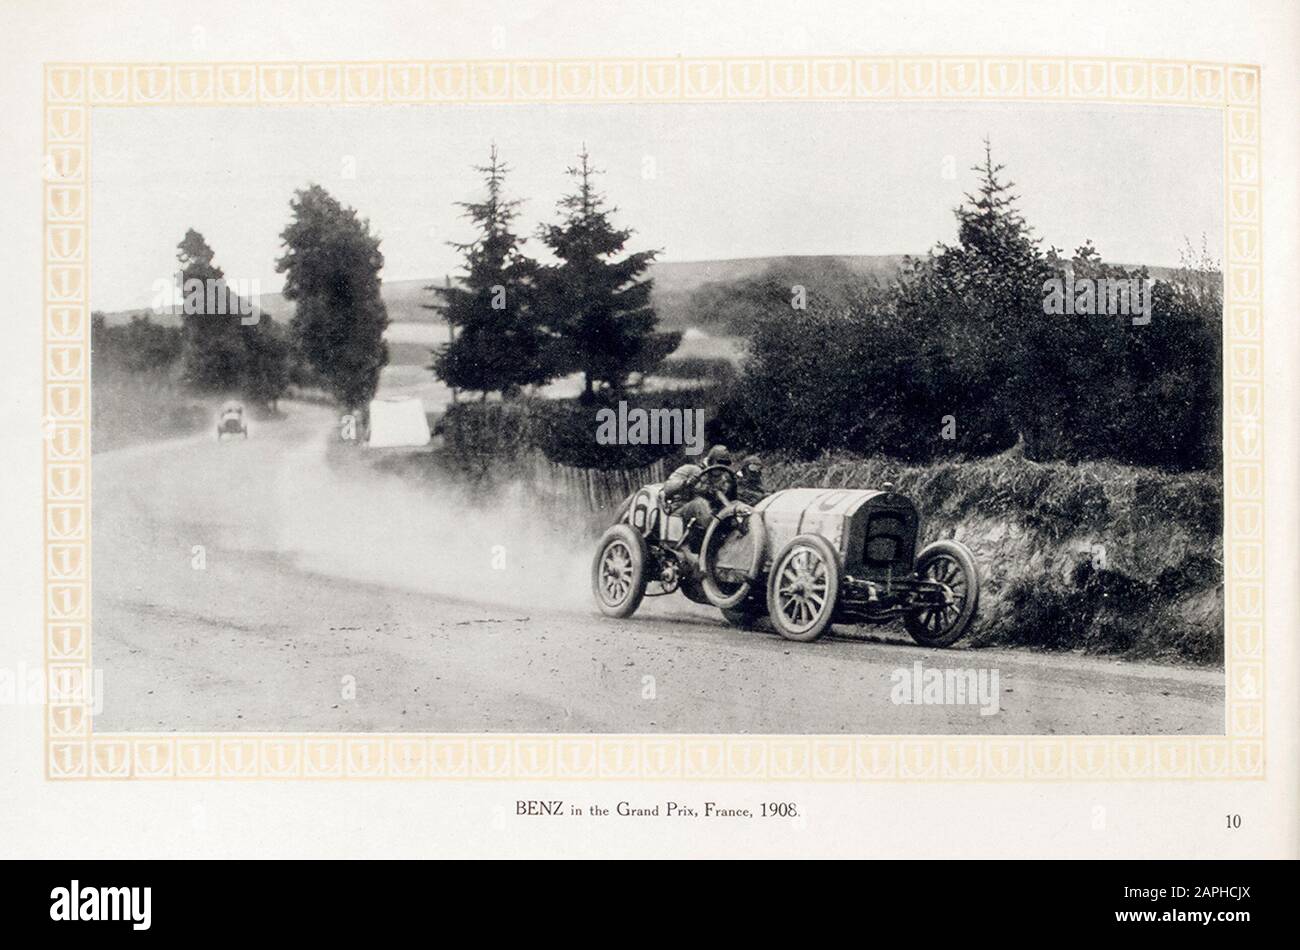 Vintage car, Benz motor car, automobile, Benz racing car in the Grand Prix of France 1908, from the Benz & Co trade catalogue, photograph 1909 Stock Photo